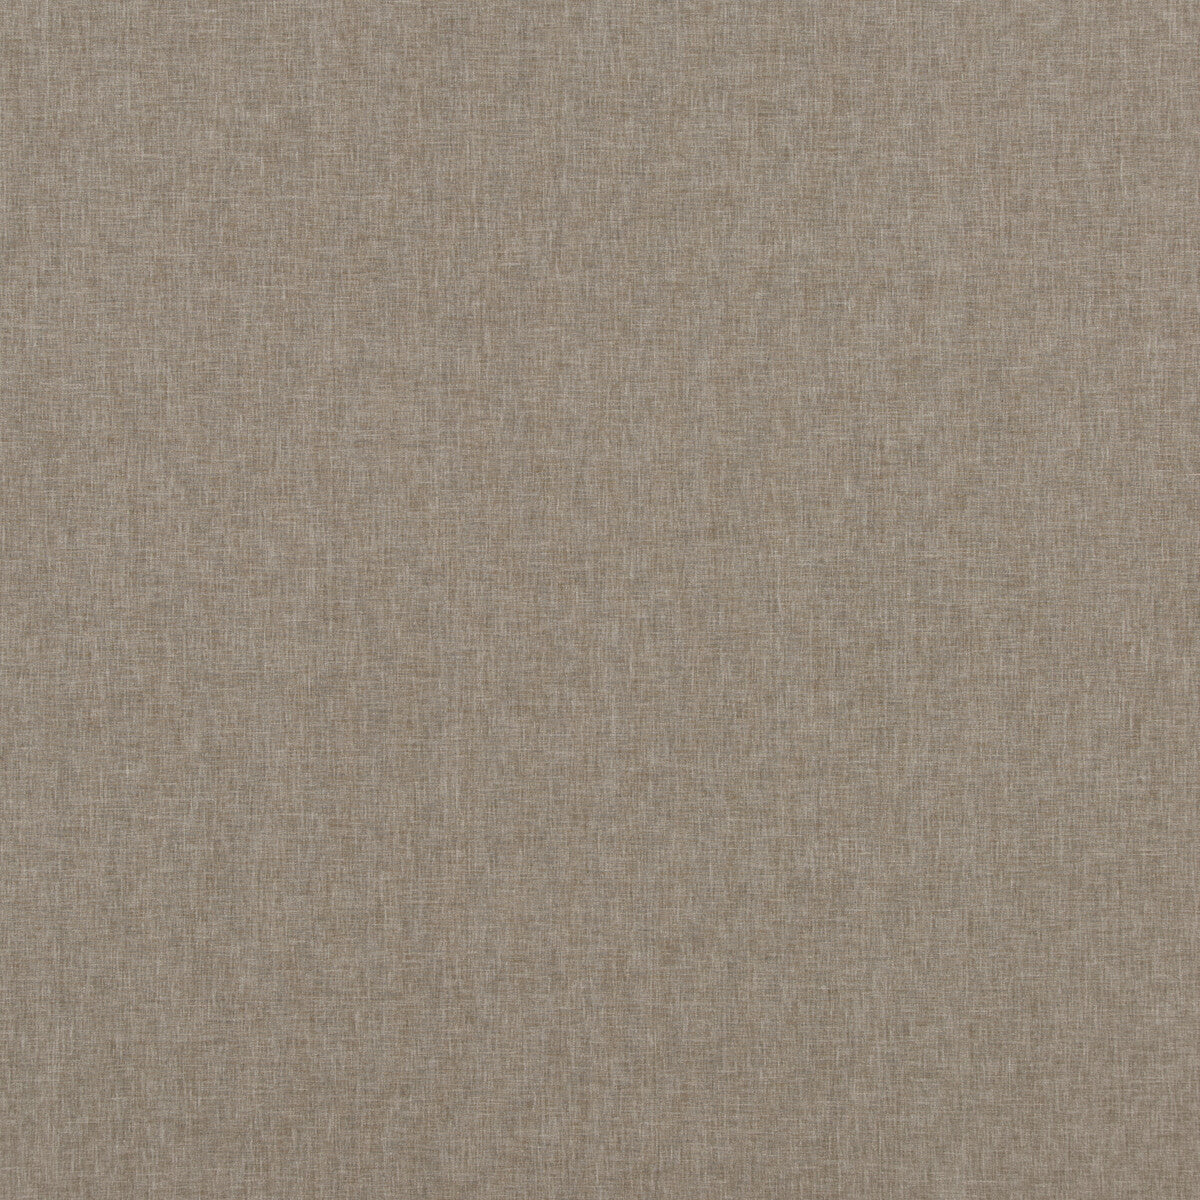 Carnival Plain fabric in shingle color - pattern PF50420.915.0 - by Baker Lifestyle in the Carnival collection